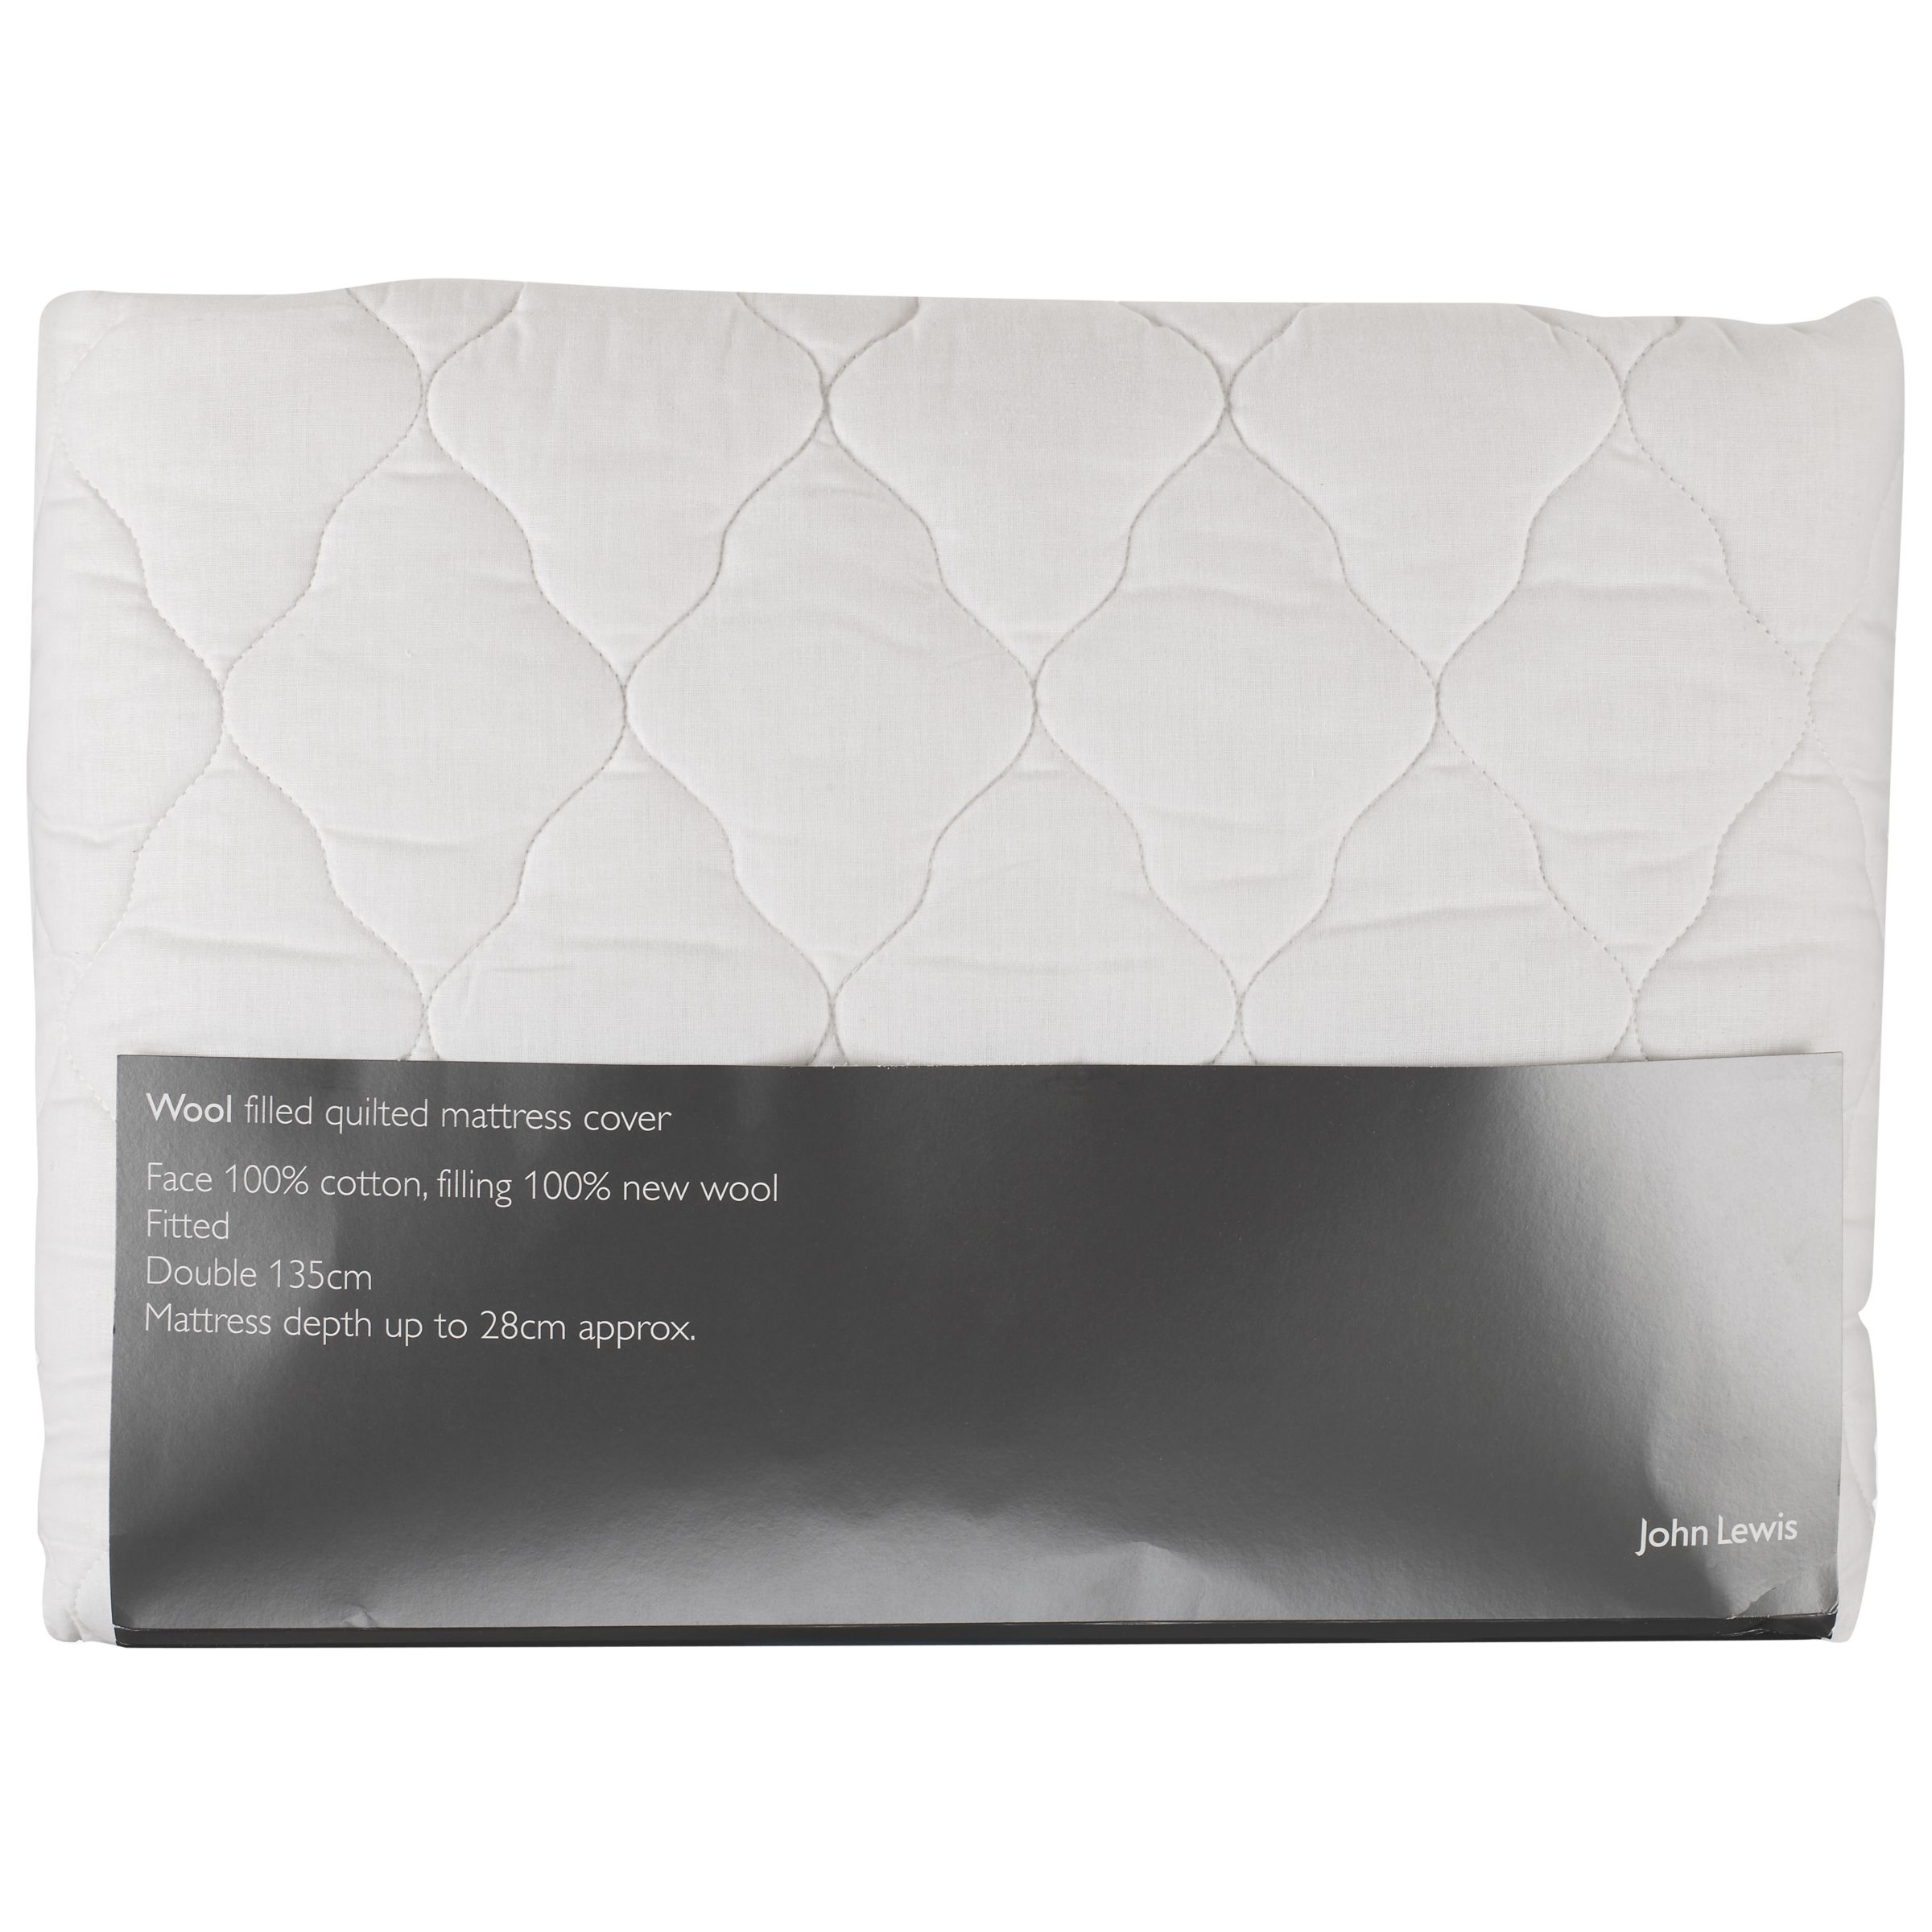 John Lewis Wool Filled Quilted Mattress Protector, Super Kingsize